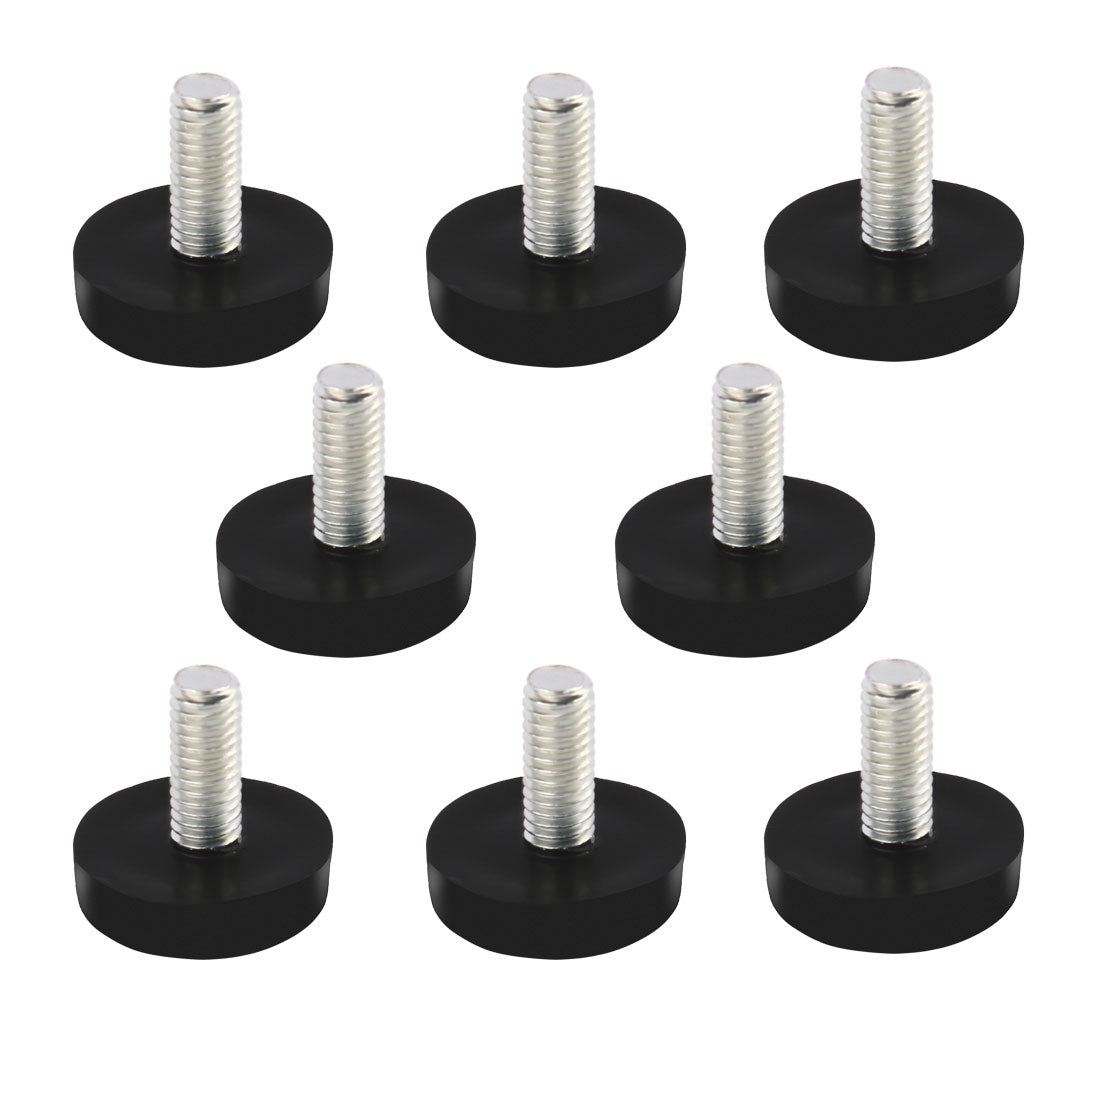 uxcell Uxcell Home office Table Desk Glide Leveling Foot M6x15mm Thread Black 8pcs